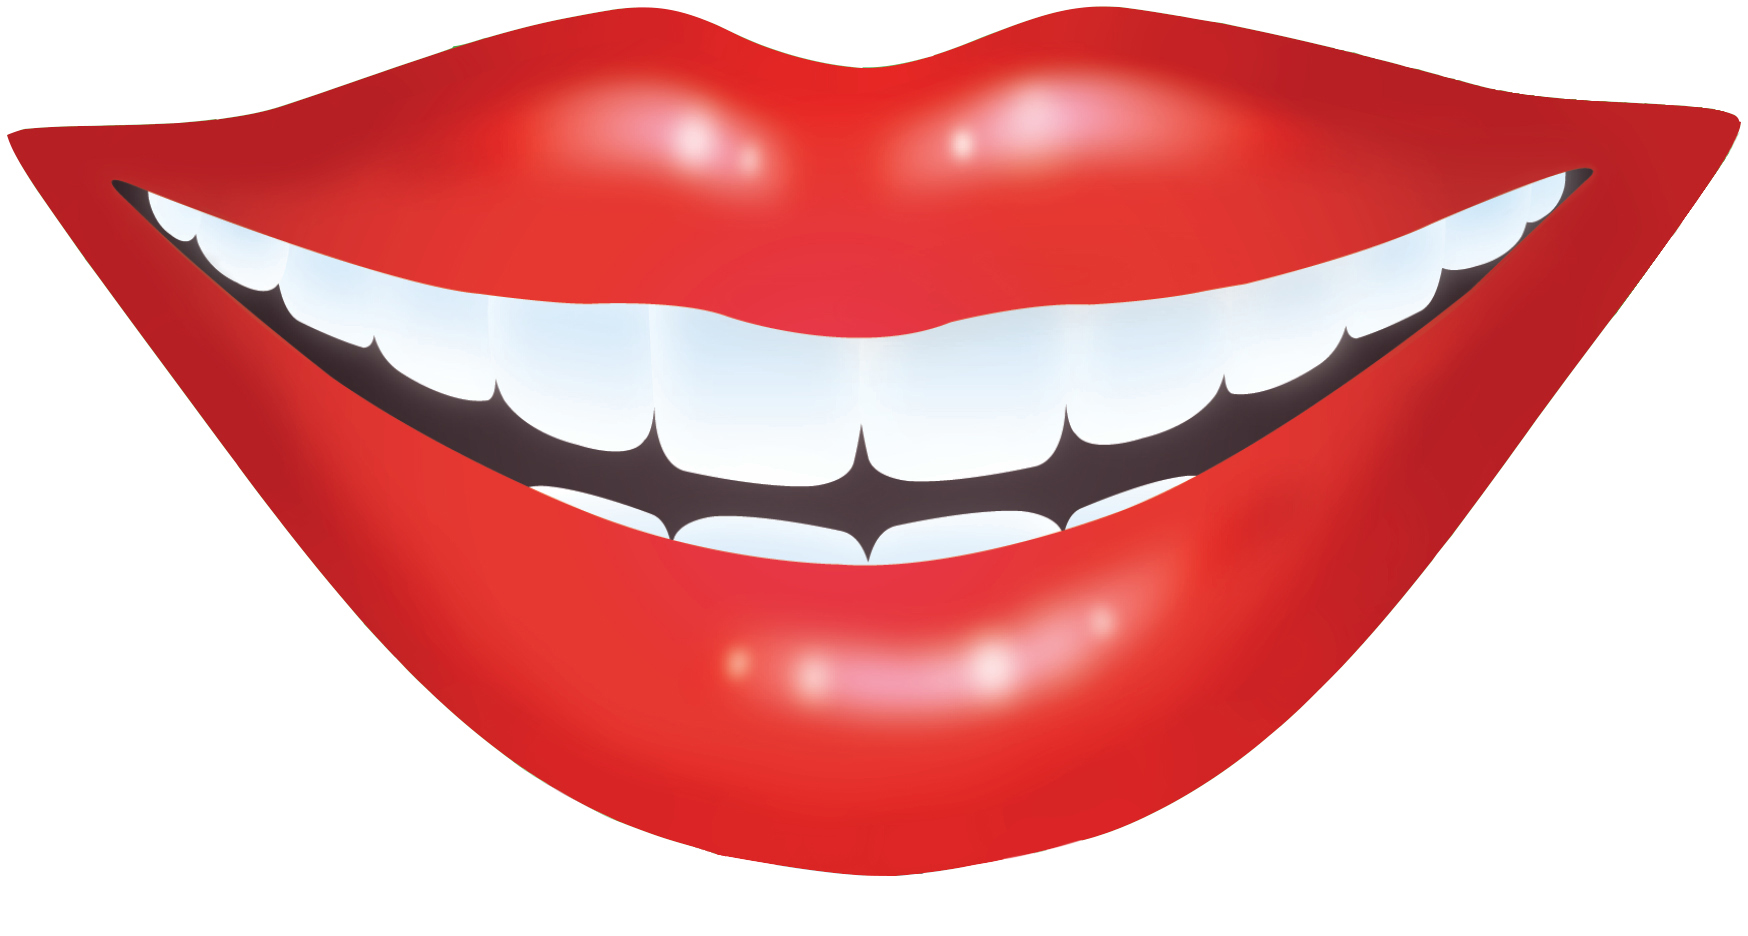 Smiling Lips - ClipArt Best